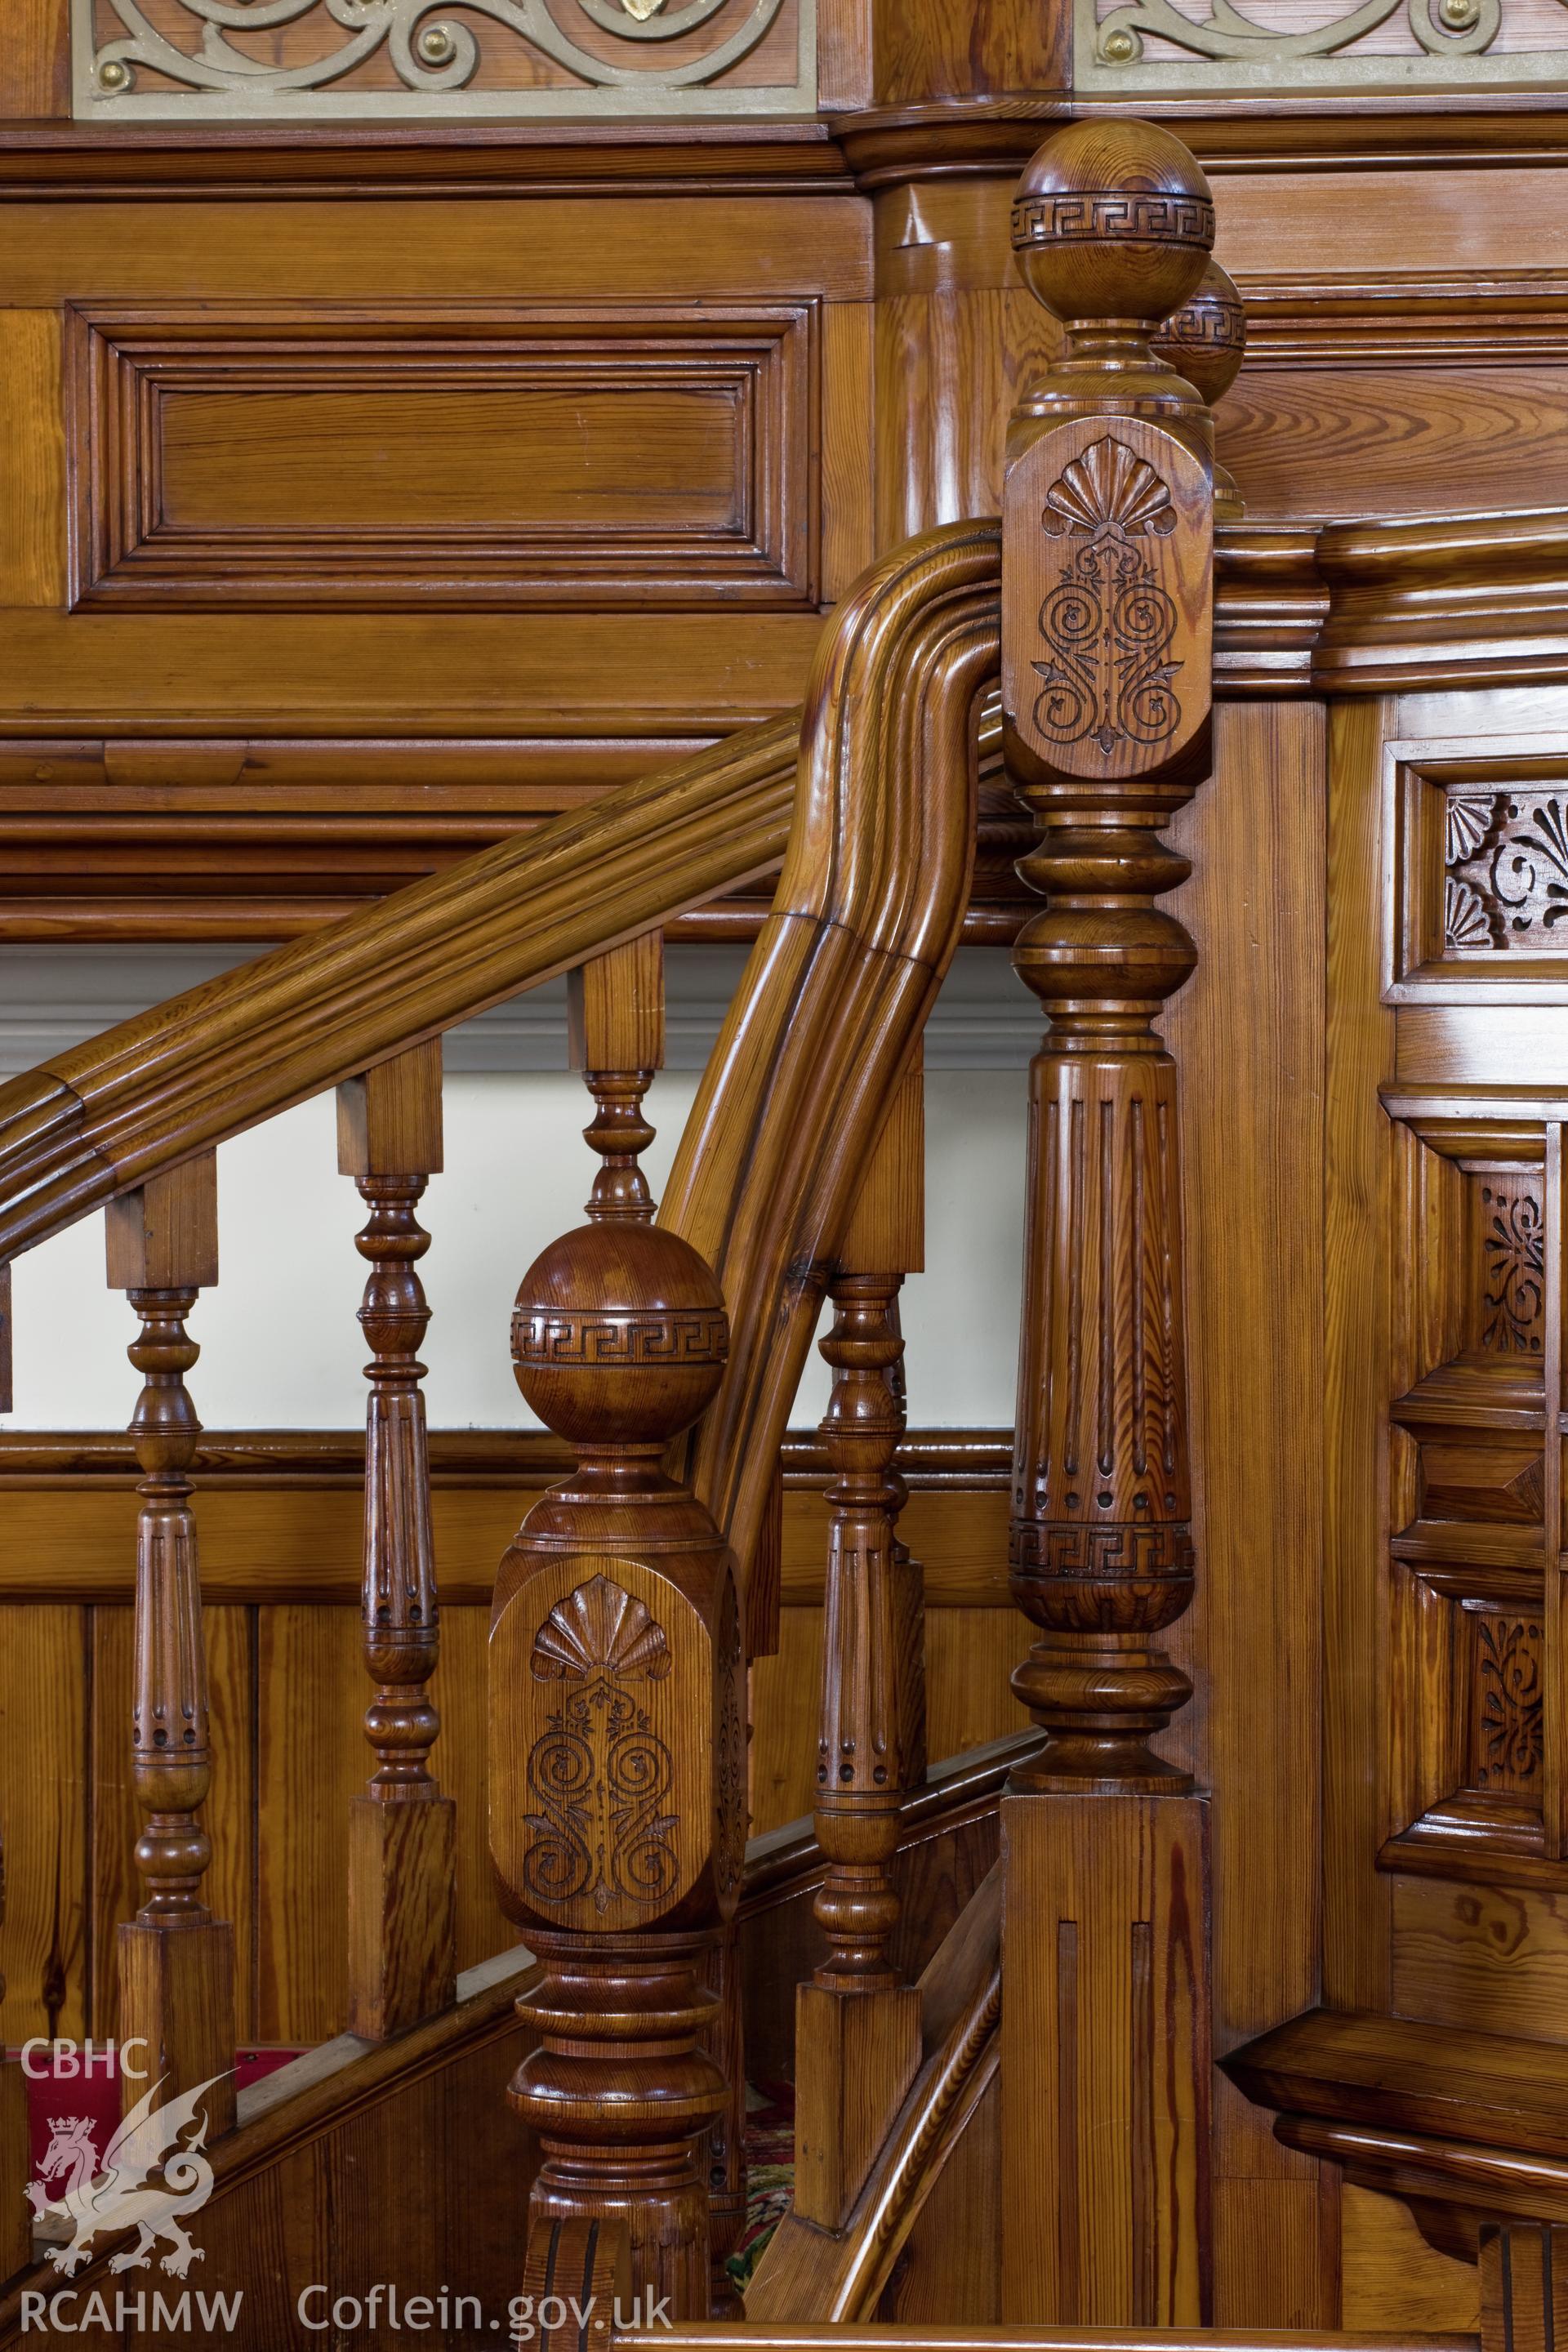 Detail of stair woodwork.